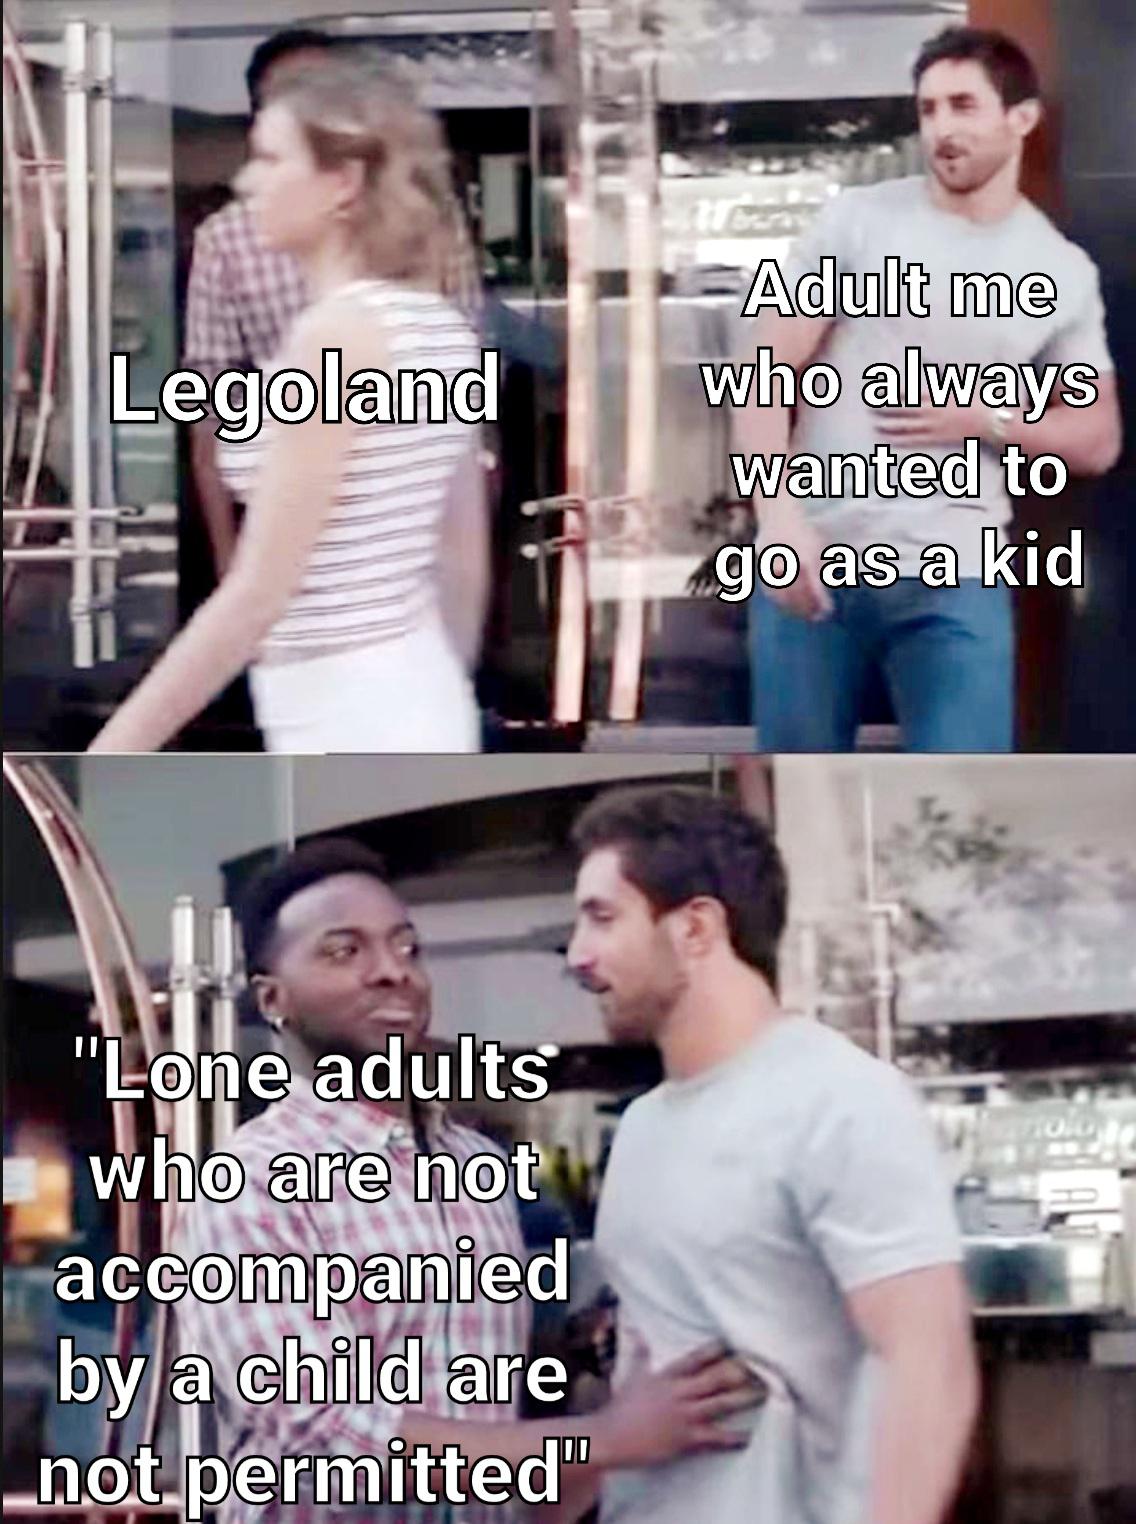 dank memes - rac meme - Legoland Adult me who always wanted to go as a kid "Lone adults who are not accompanied by a child are not permitted a